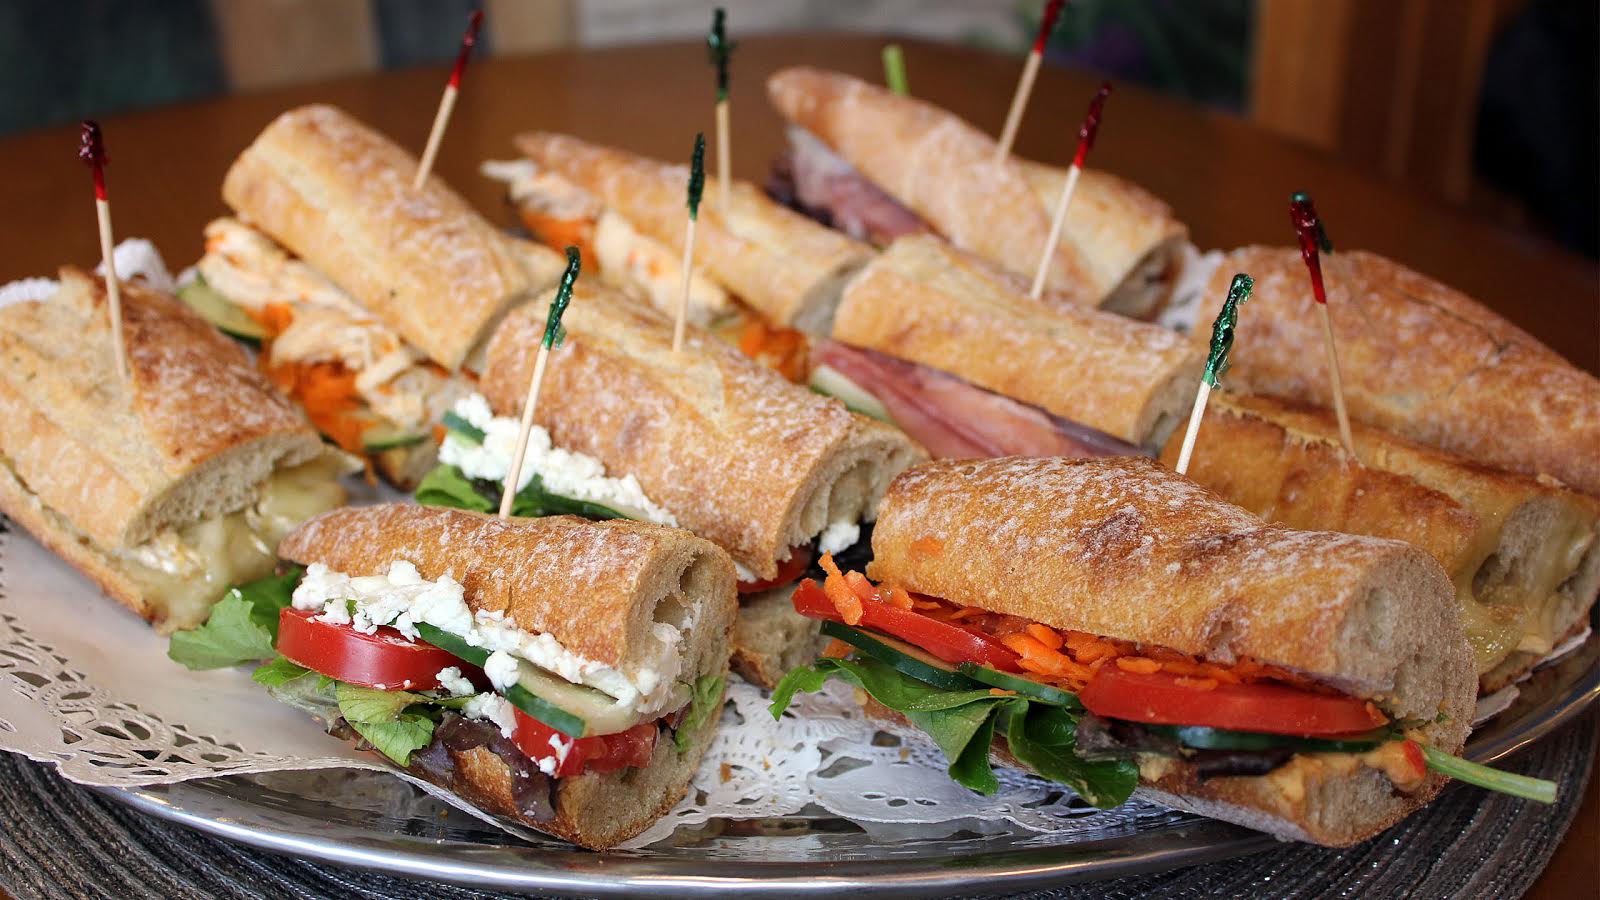 Sandwiches by La Petite France Bakery. Submitted photo